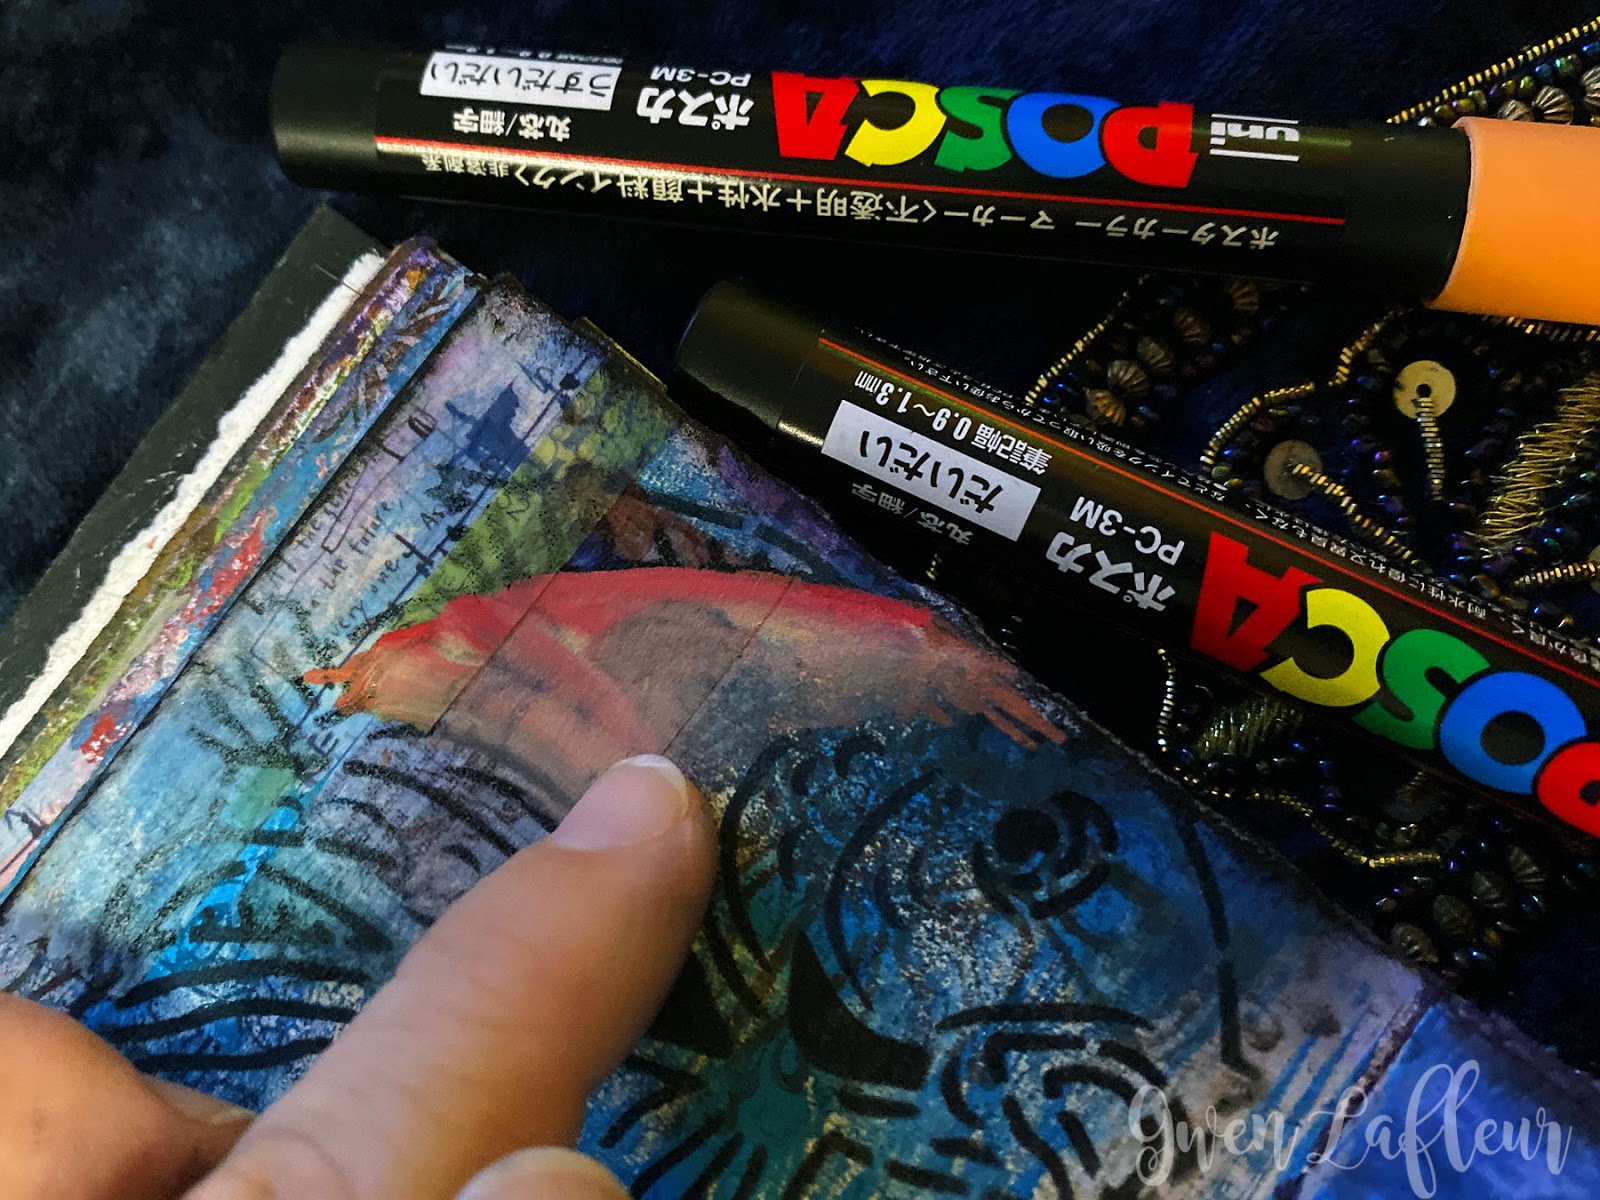 Posca Pens are Perfect for Painting - Jackson's Art Blog